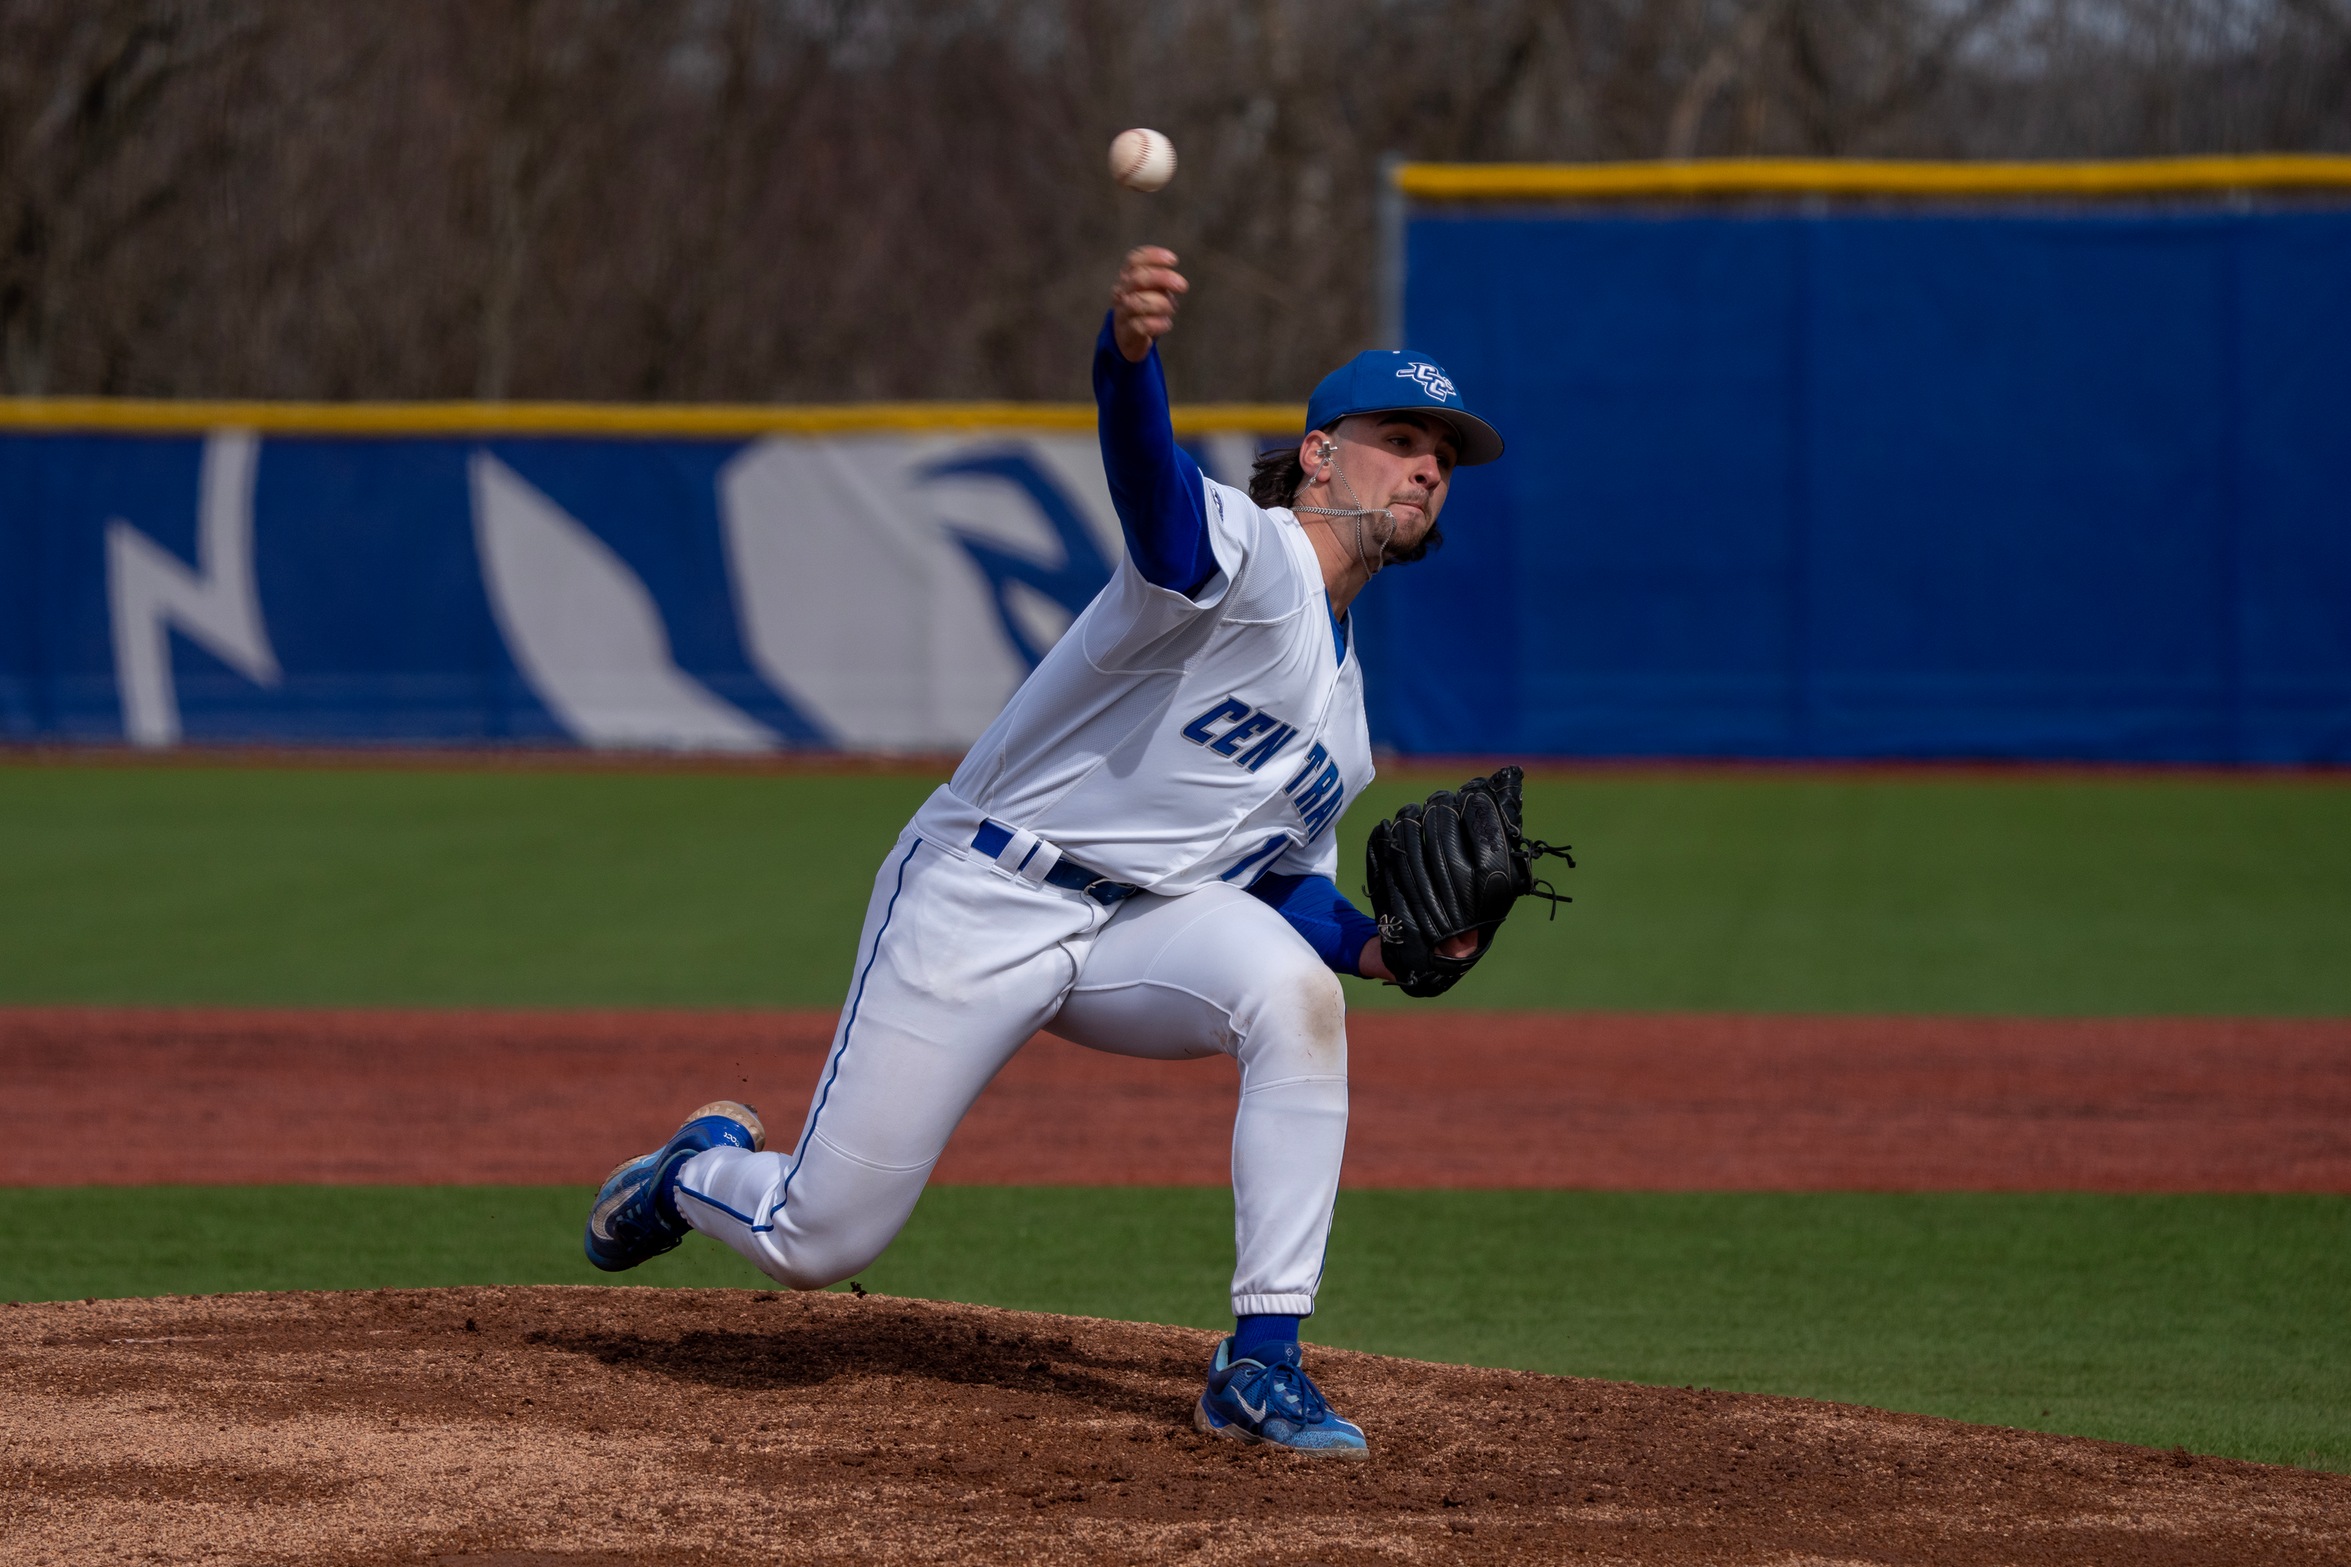 TJ Wainwright tossed 5.0 innings in relief for the win Friday (Steve McLaughlin Photography)